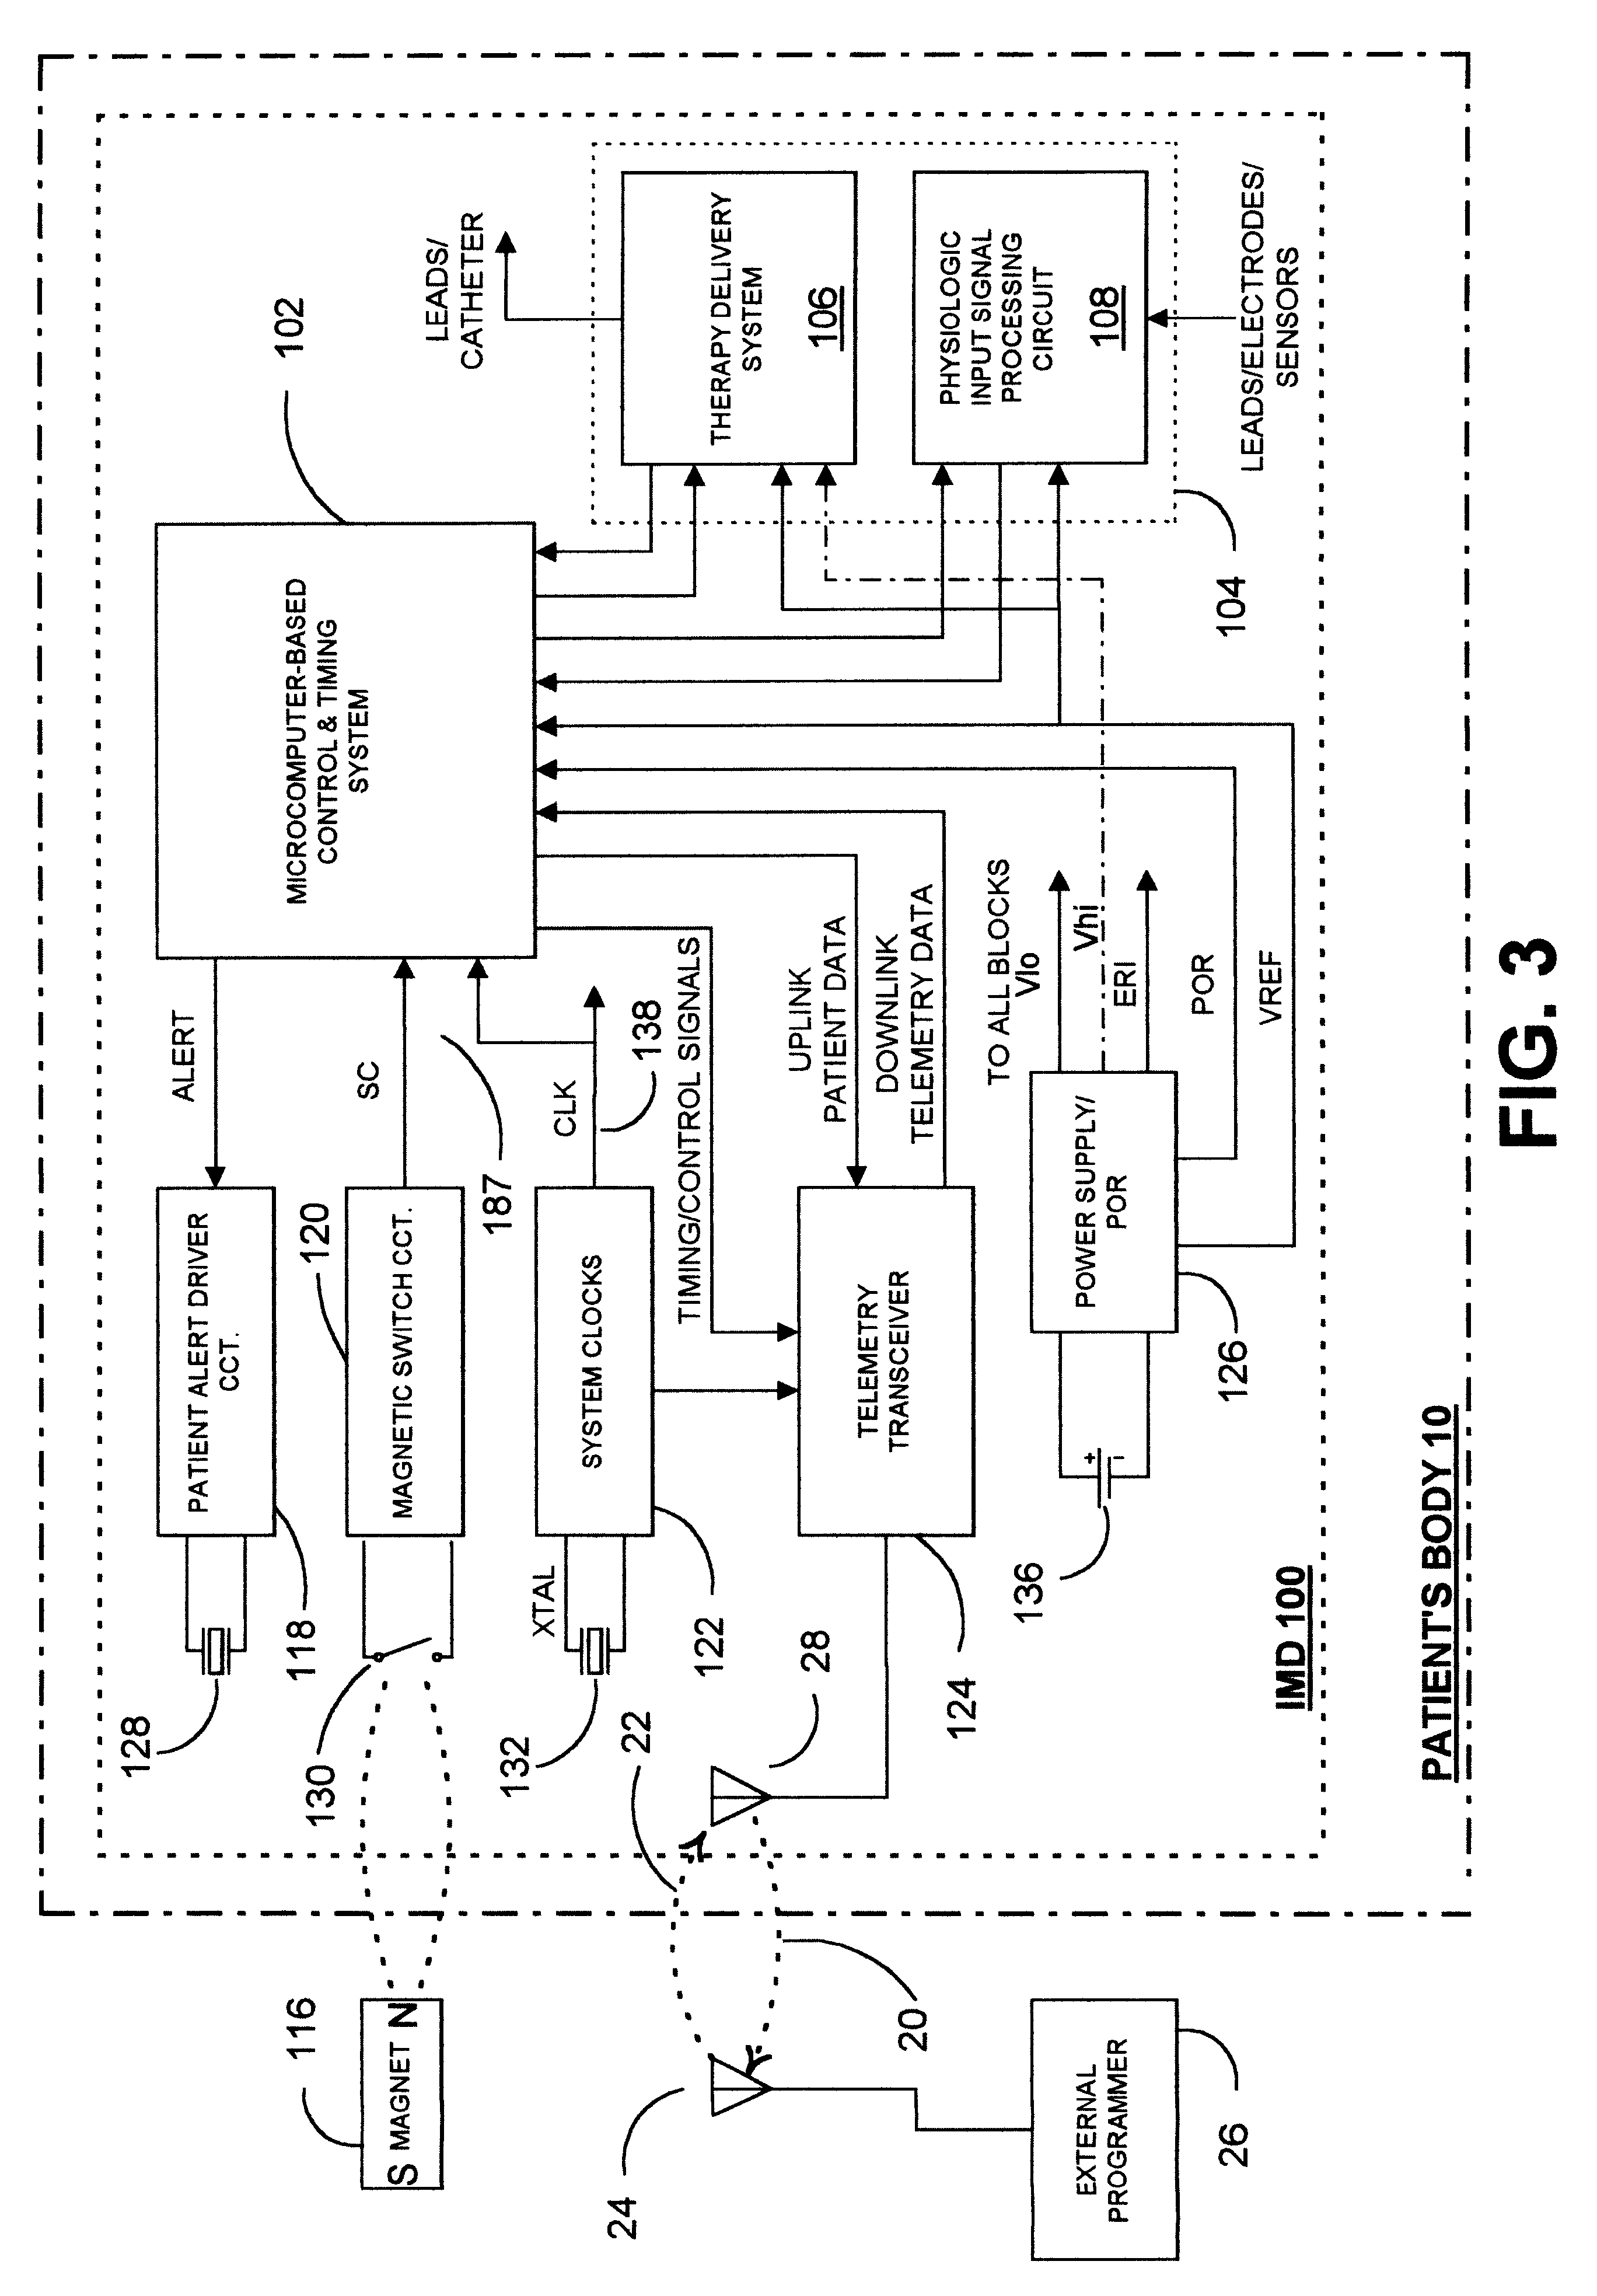 Low energy consumption RF telemetry control for an implantable medical device